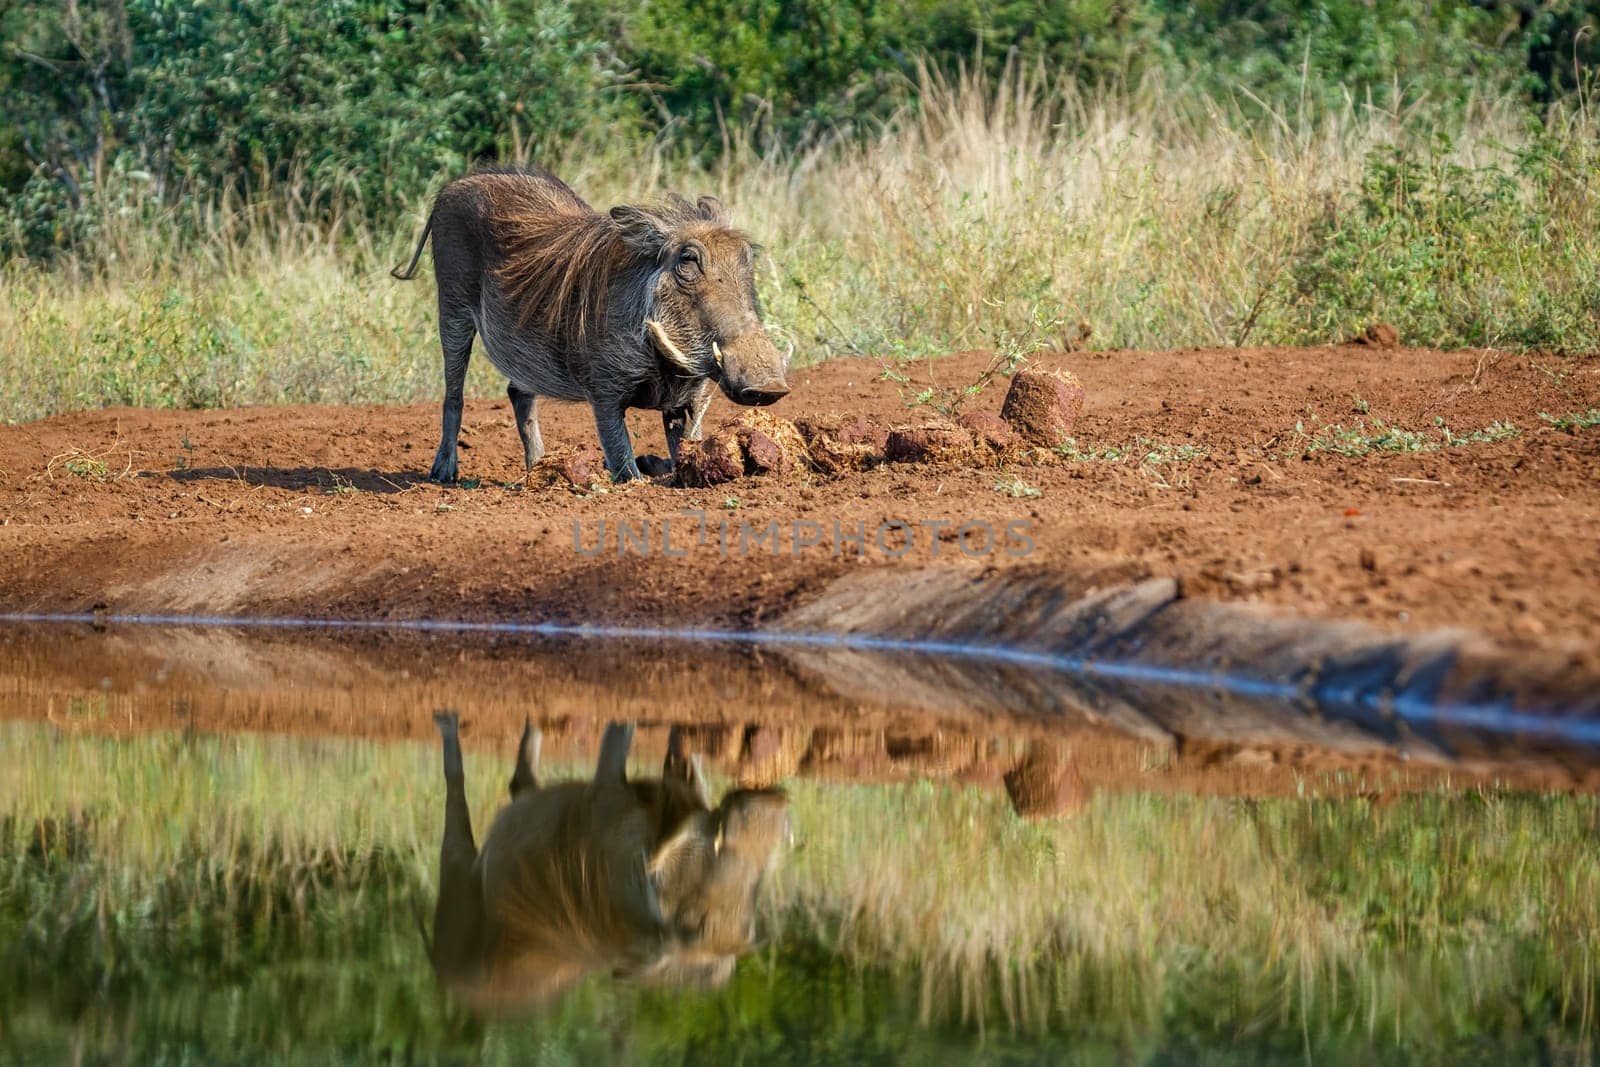 Common warthog in elephant dung along waterhole in Kruger National park, South Africa ; Specie Phacochoerus africanus family of Suidae